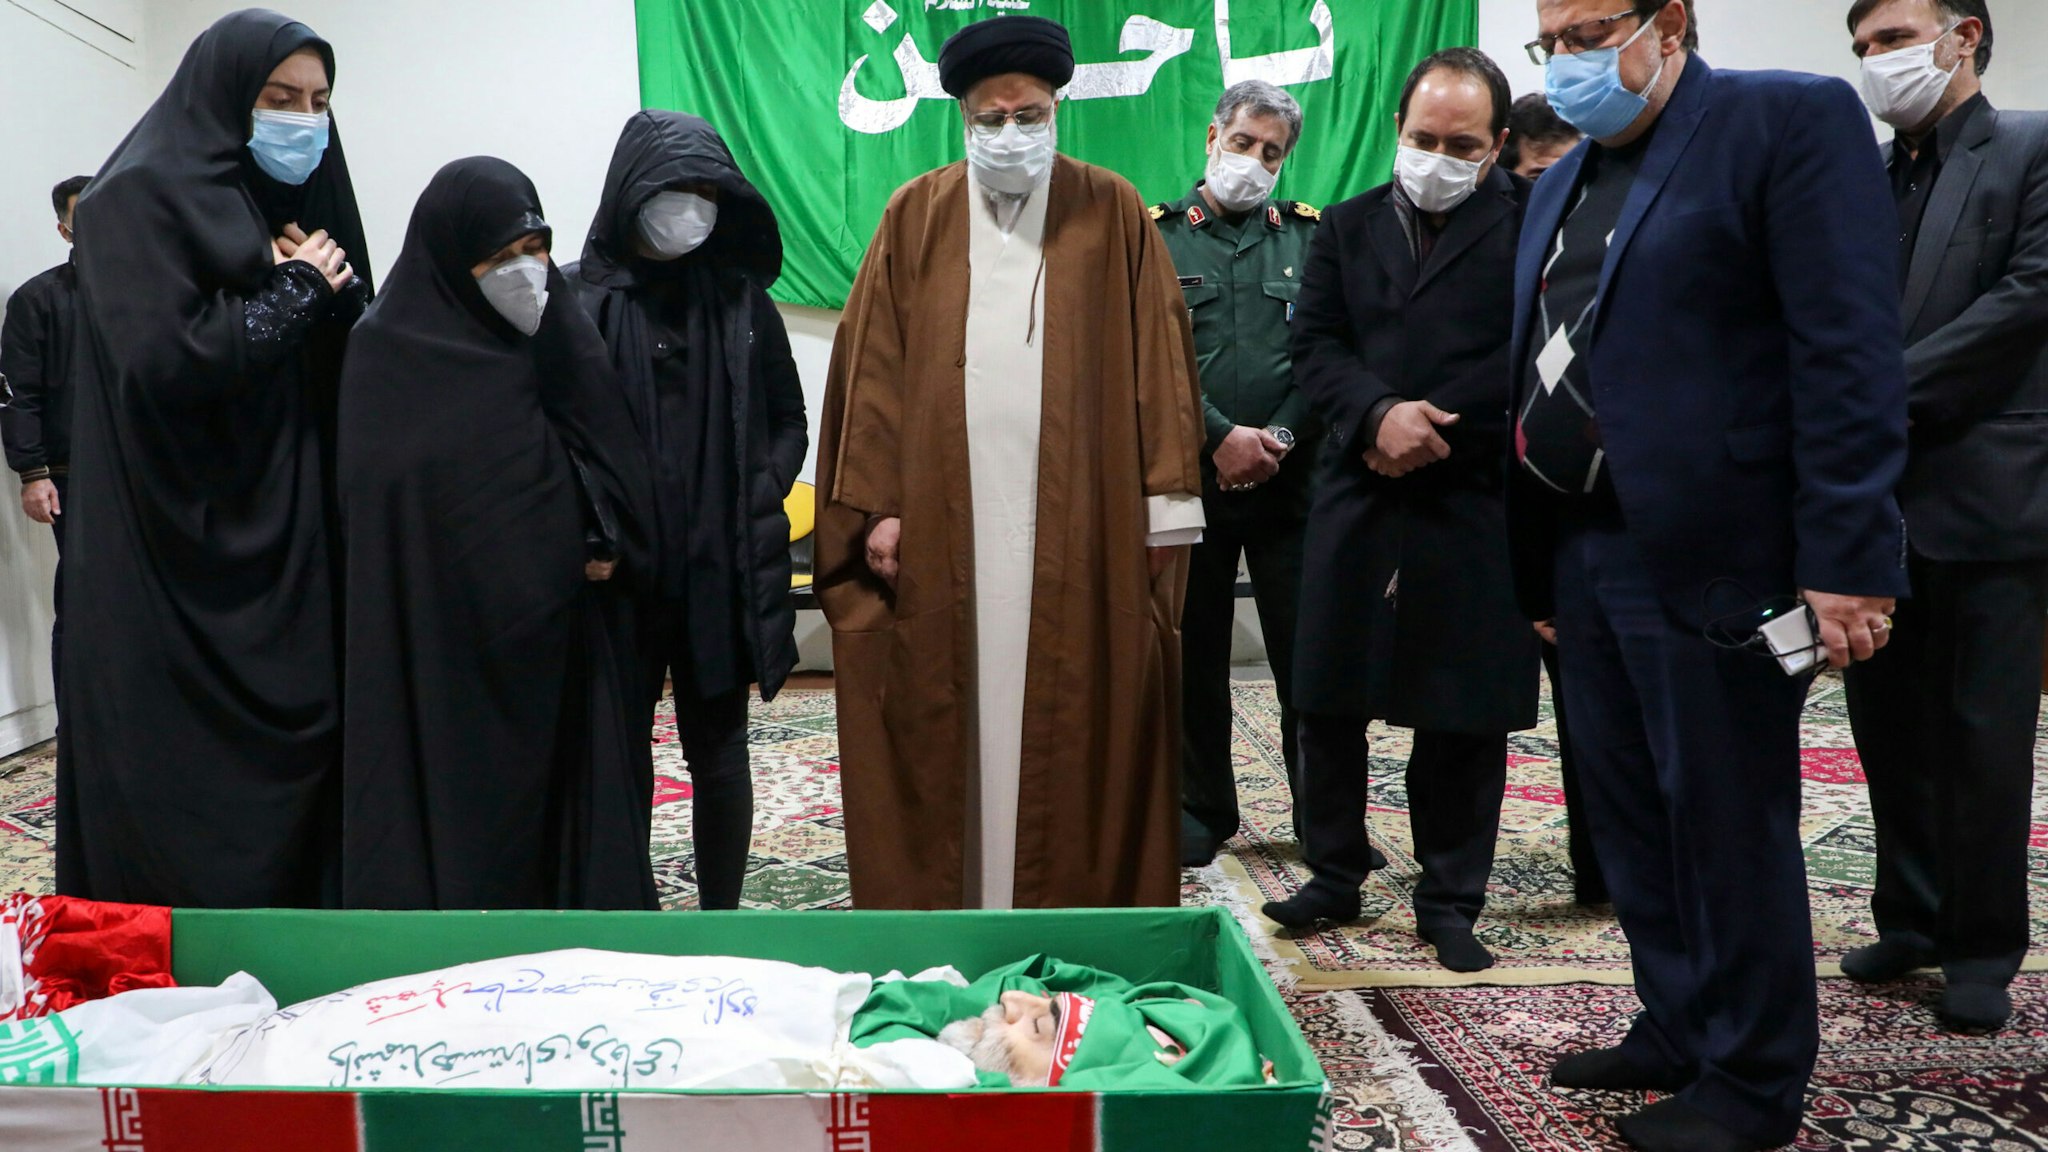 Iran's Judiciary Chief Ayatollah Ebrahim Raisi (C) pays respects to the body of slain scientist Mohsen Fakhrizadeh among his family, in the capital Tehran on November 28, 2020. - Mohsen Fakhrizadeh, dubbed by Israel as the "father" of Iran's nuclear programme, died on November 27 after being seriously wounded when assailants targeted his car and engaged in a gunfight with his bodyguards outside Tehran, according to Iran's defence ministry. The assassination comes less than two months before US President-elect Joe Biden is due to take office, after a tumultuous four years of hawkish foreign policy in the Middle East under President Donald Trump.